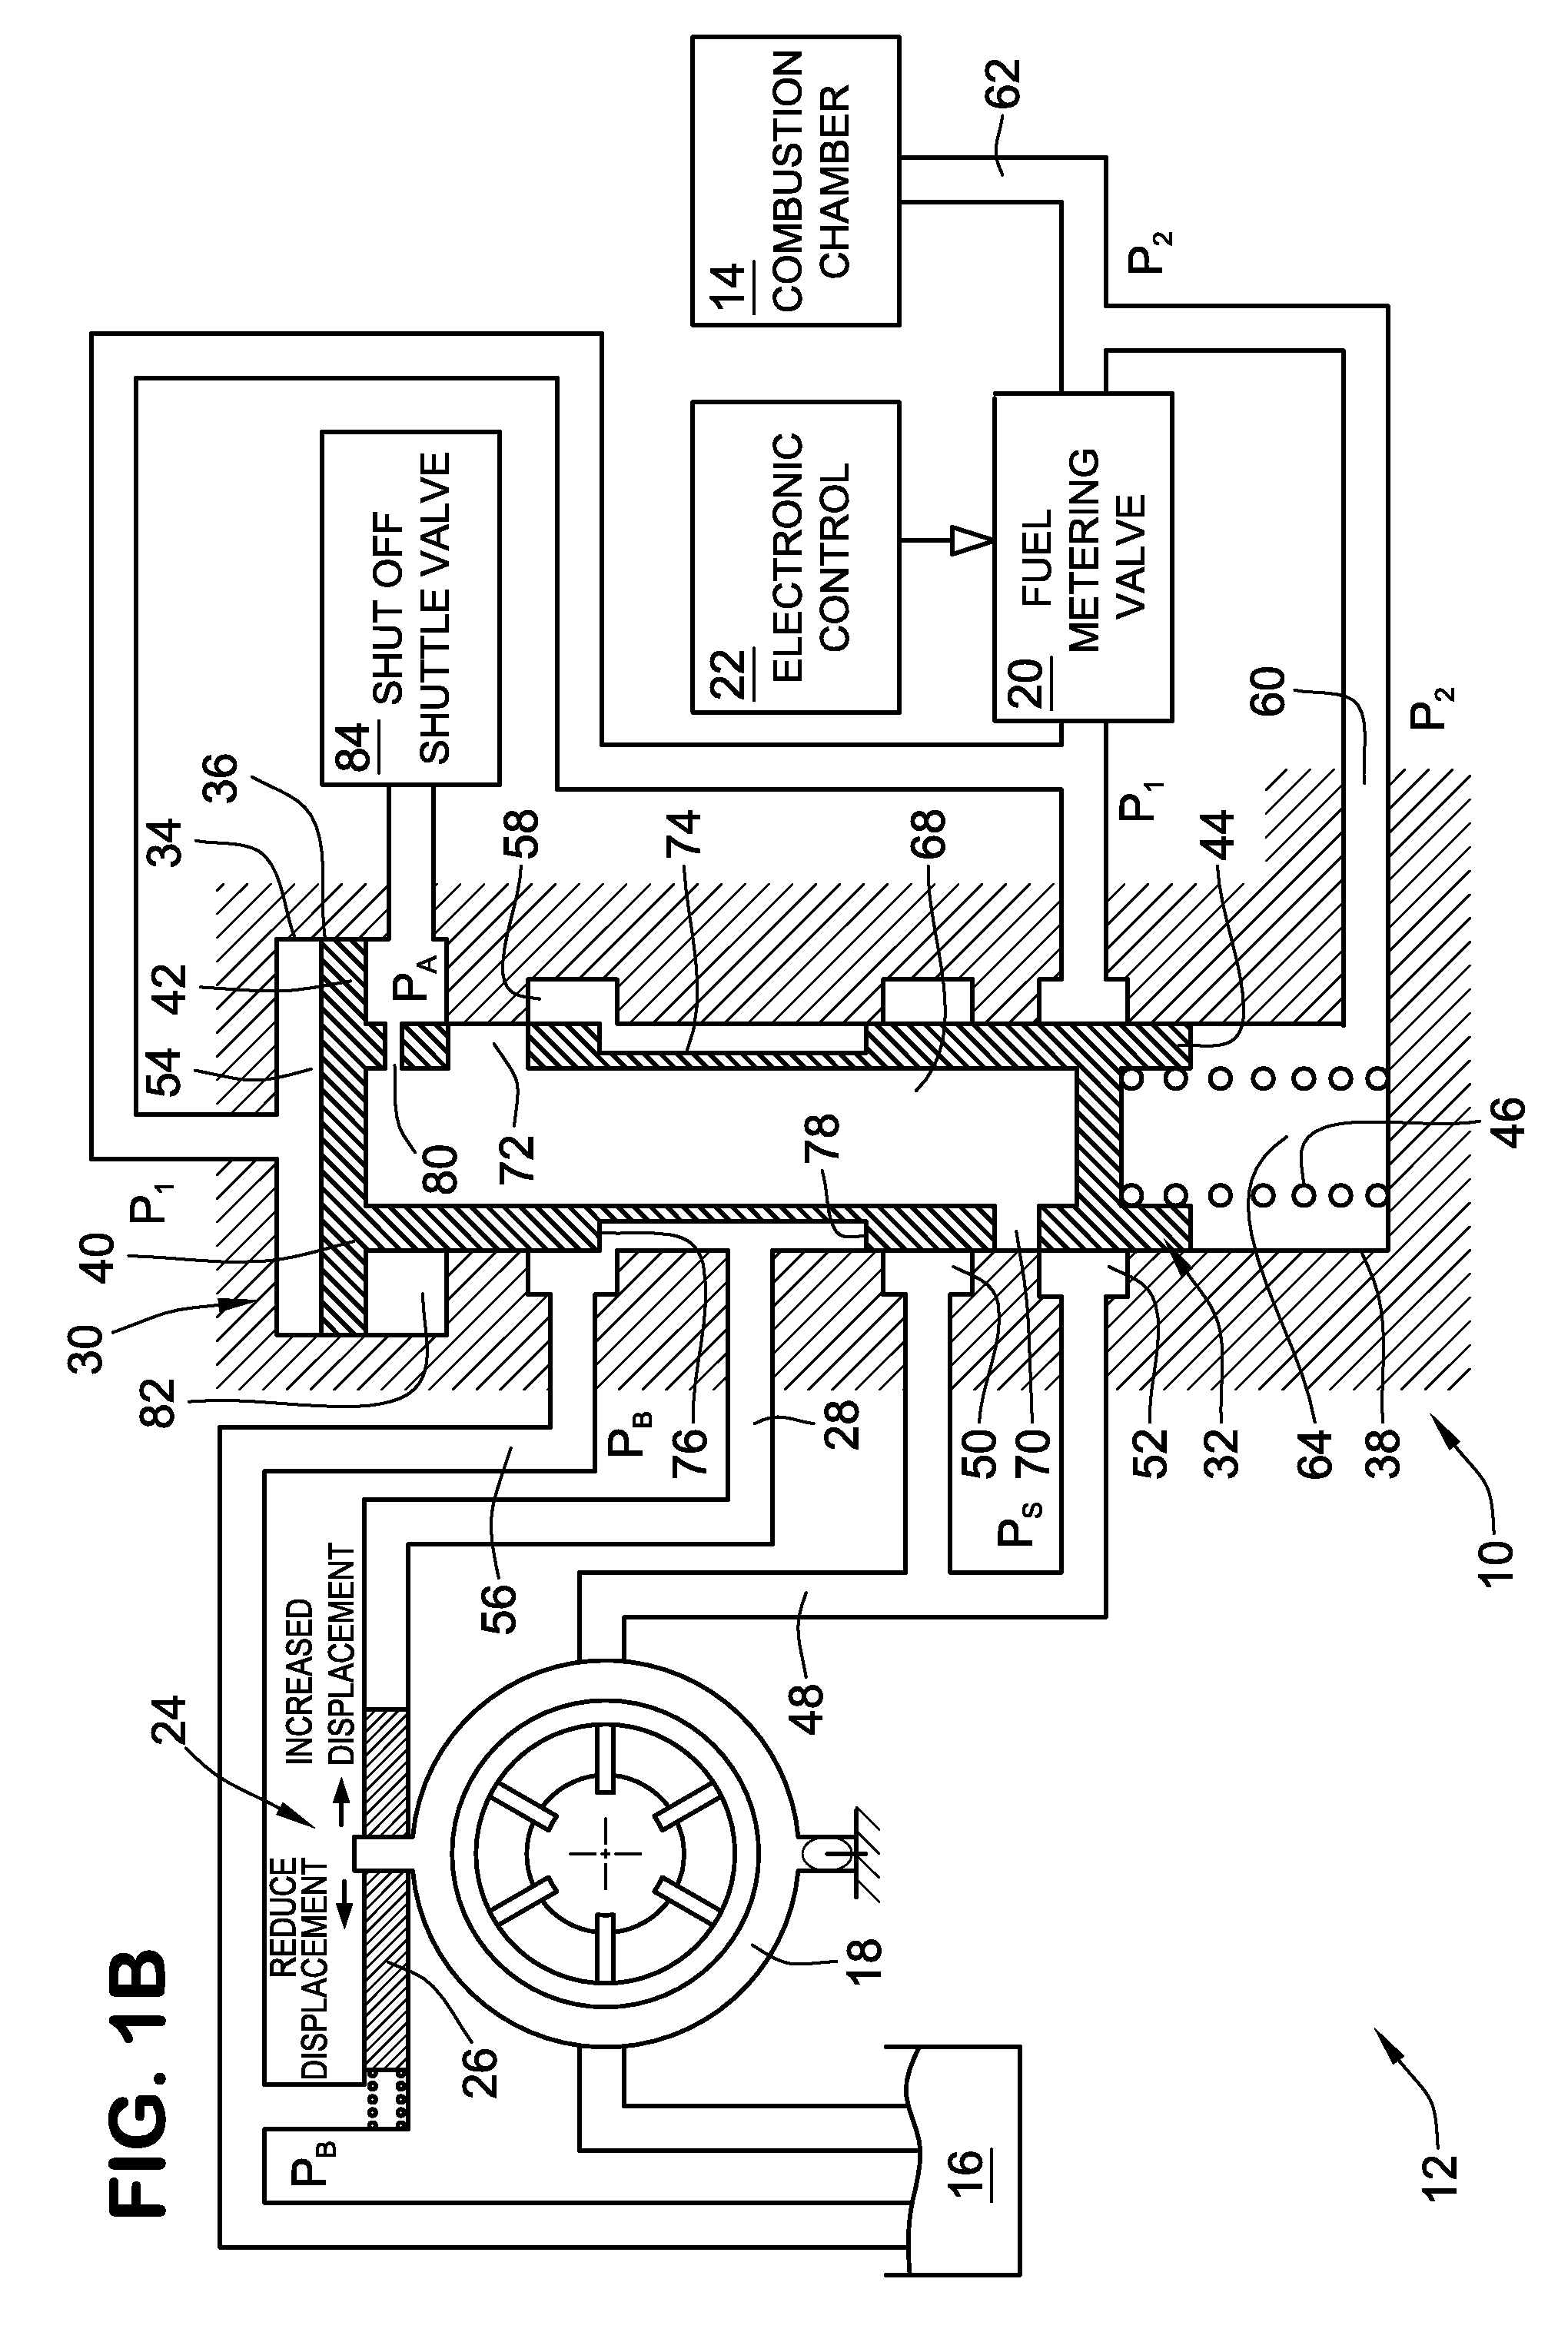 Flow Compensated Proportional Bypass Valve Combined With a Control Valve